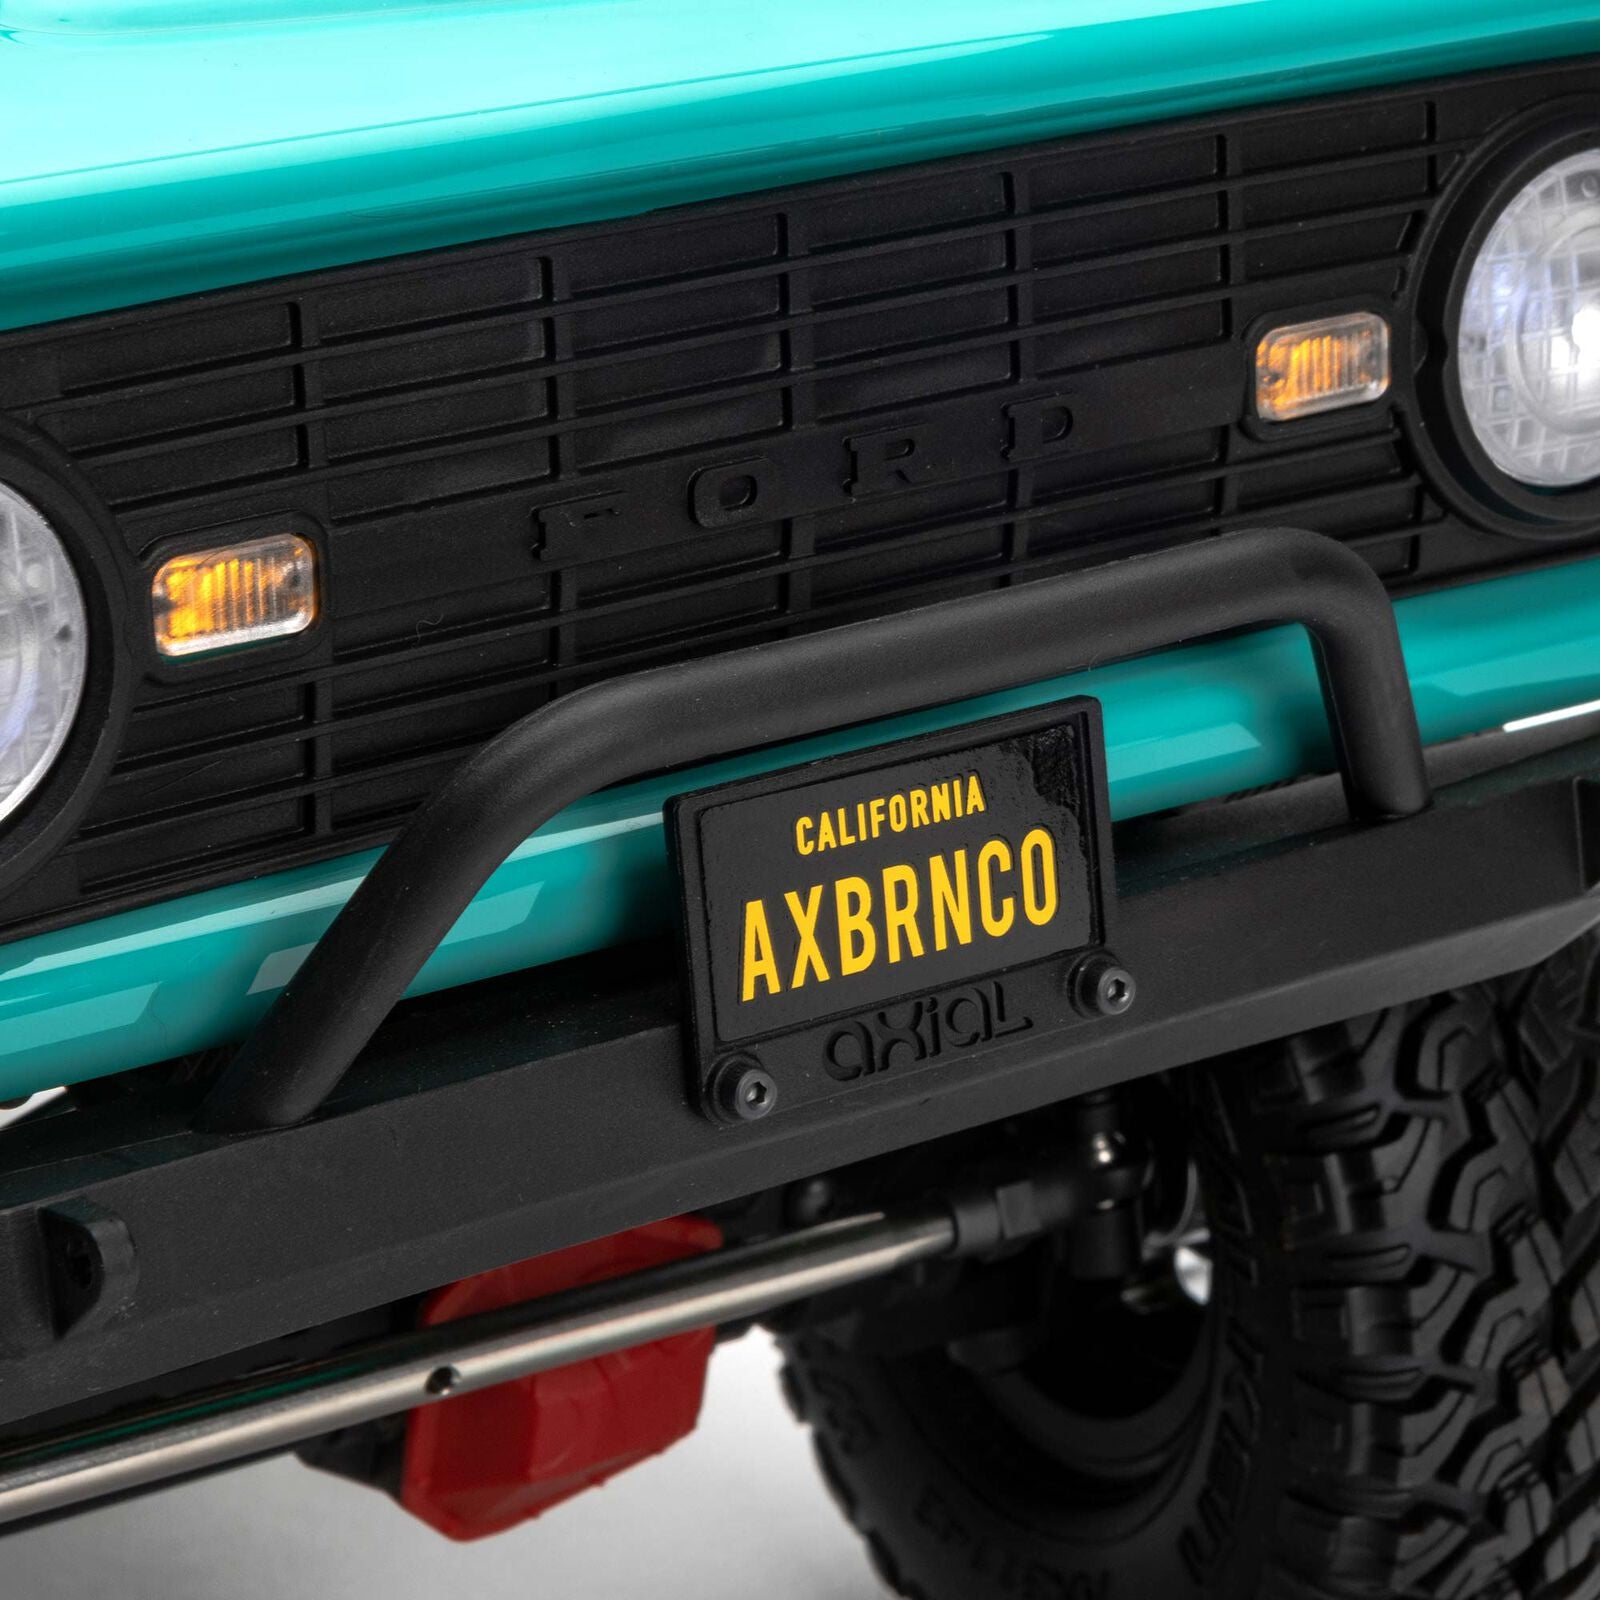 Axial SCX10 III Early Ford Bronco 1/10th 4wd RTR (Teal) (AXI03014BT1),  559,00 €